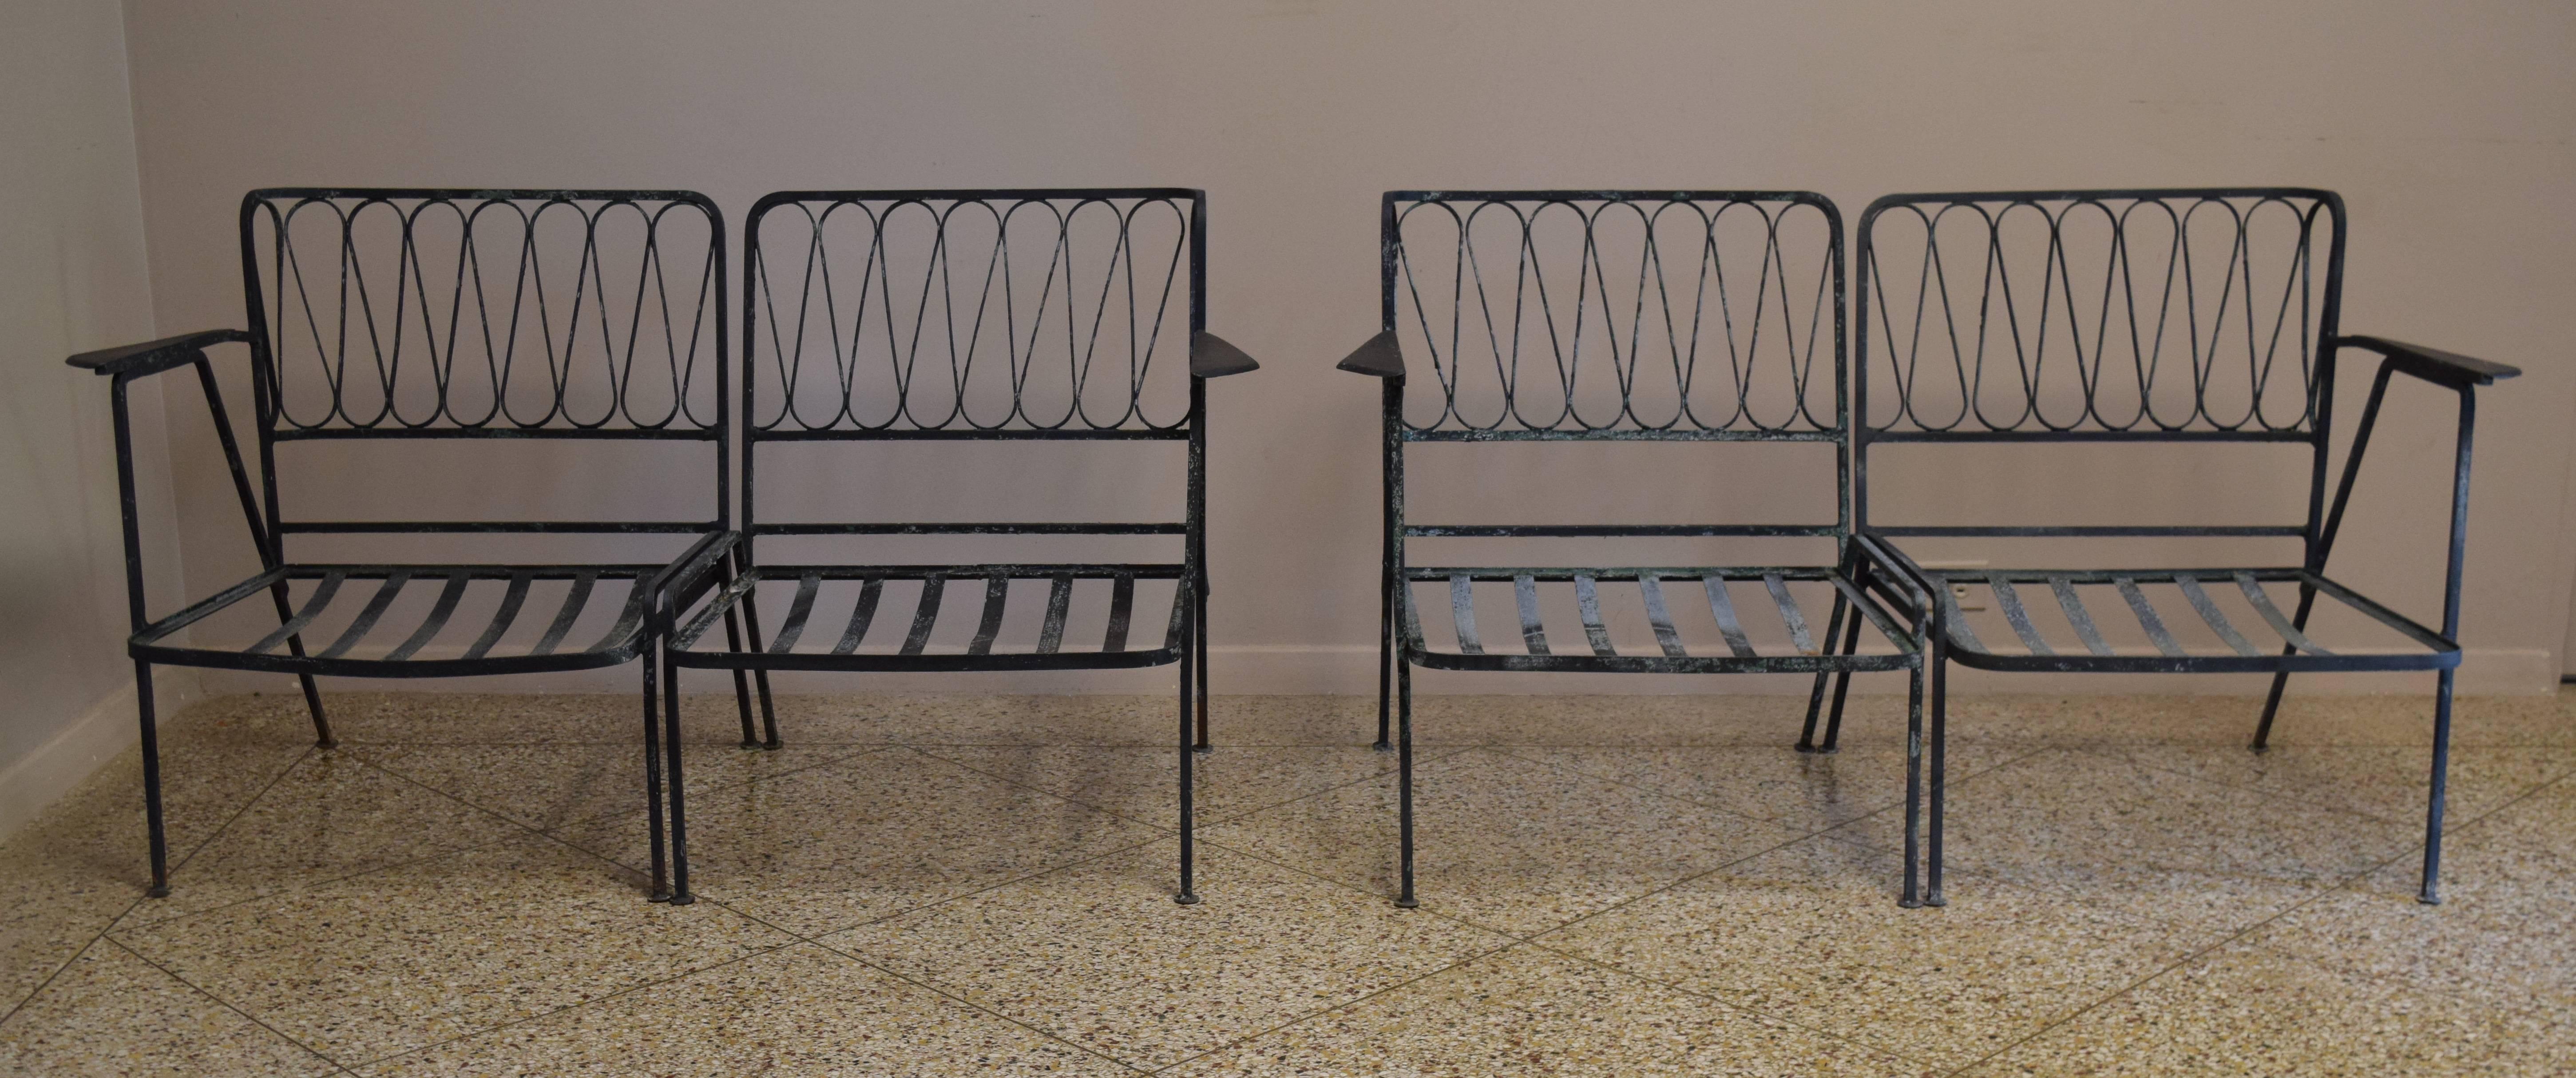 Beautiful pair of wrought iron loveseats from the famous ribbon line by Maurizio Tempestini for Salterini. Consists of four chairs altogether.

Matching table, wall mirror and headboard also available; please contact for details.